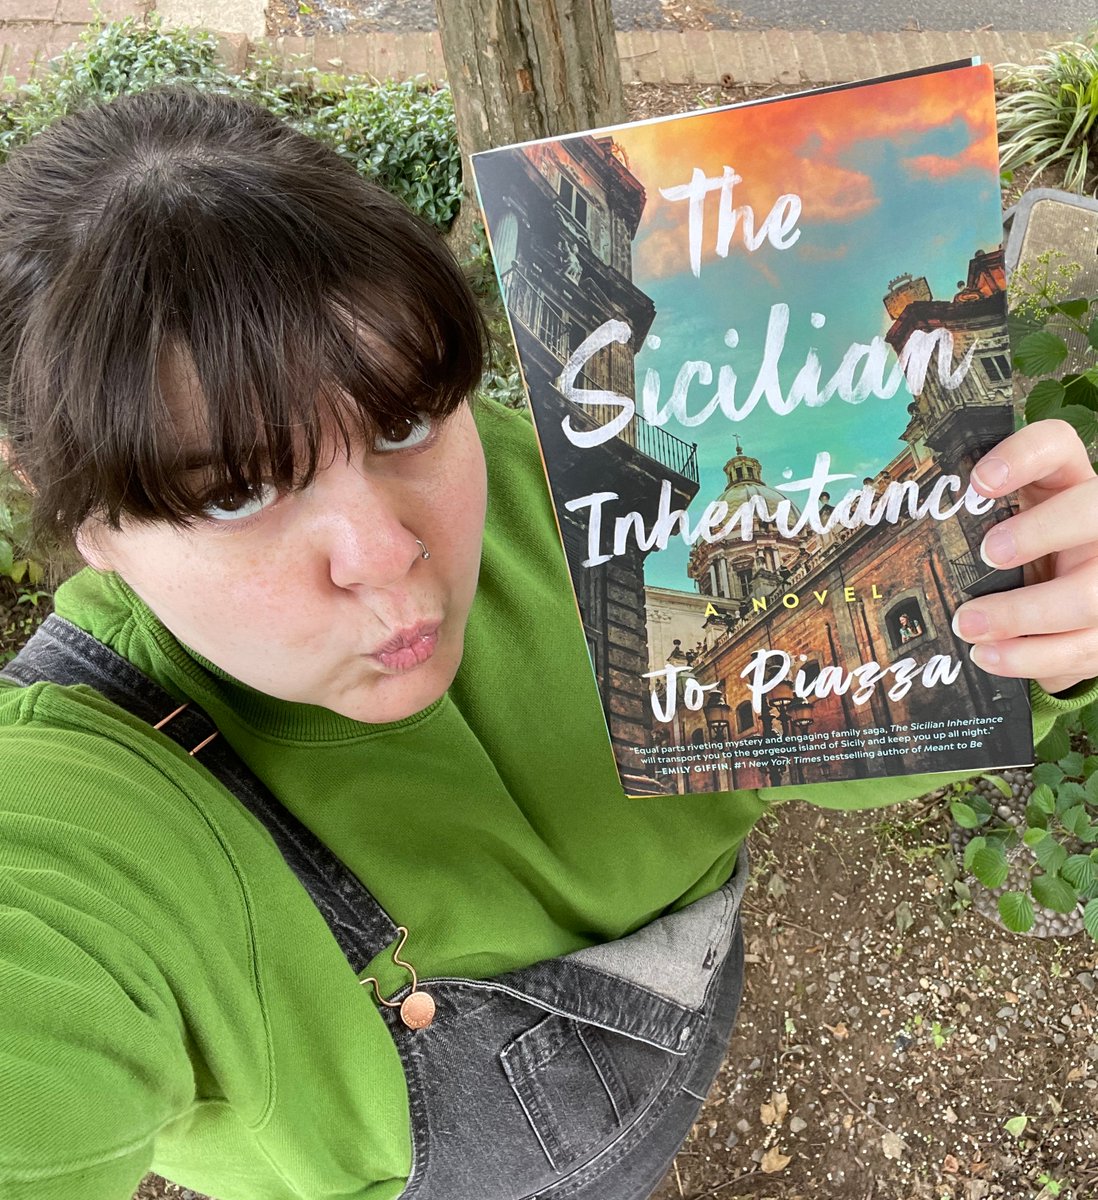 Remember our event with @JoPiazza TOMORROW? Location change incoming! We'll be at Bards Alley now on May 16th at 6:30pm! No RSVP required and the event is FREE to attend. Cozy up at the bookstore with the author as we enjoy an evening discussing The Sicilian Inheritance!